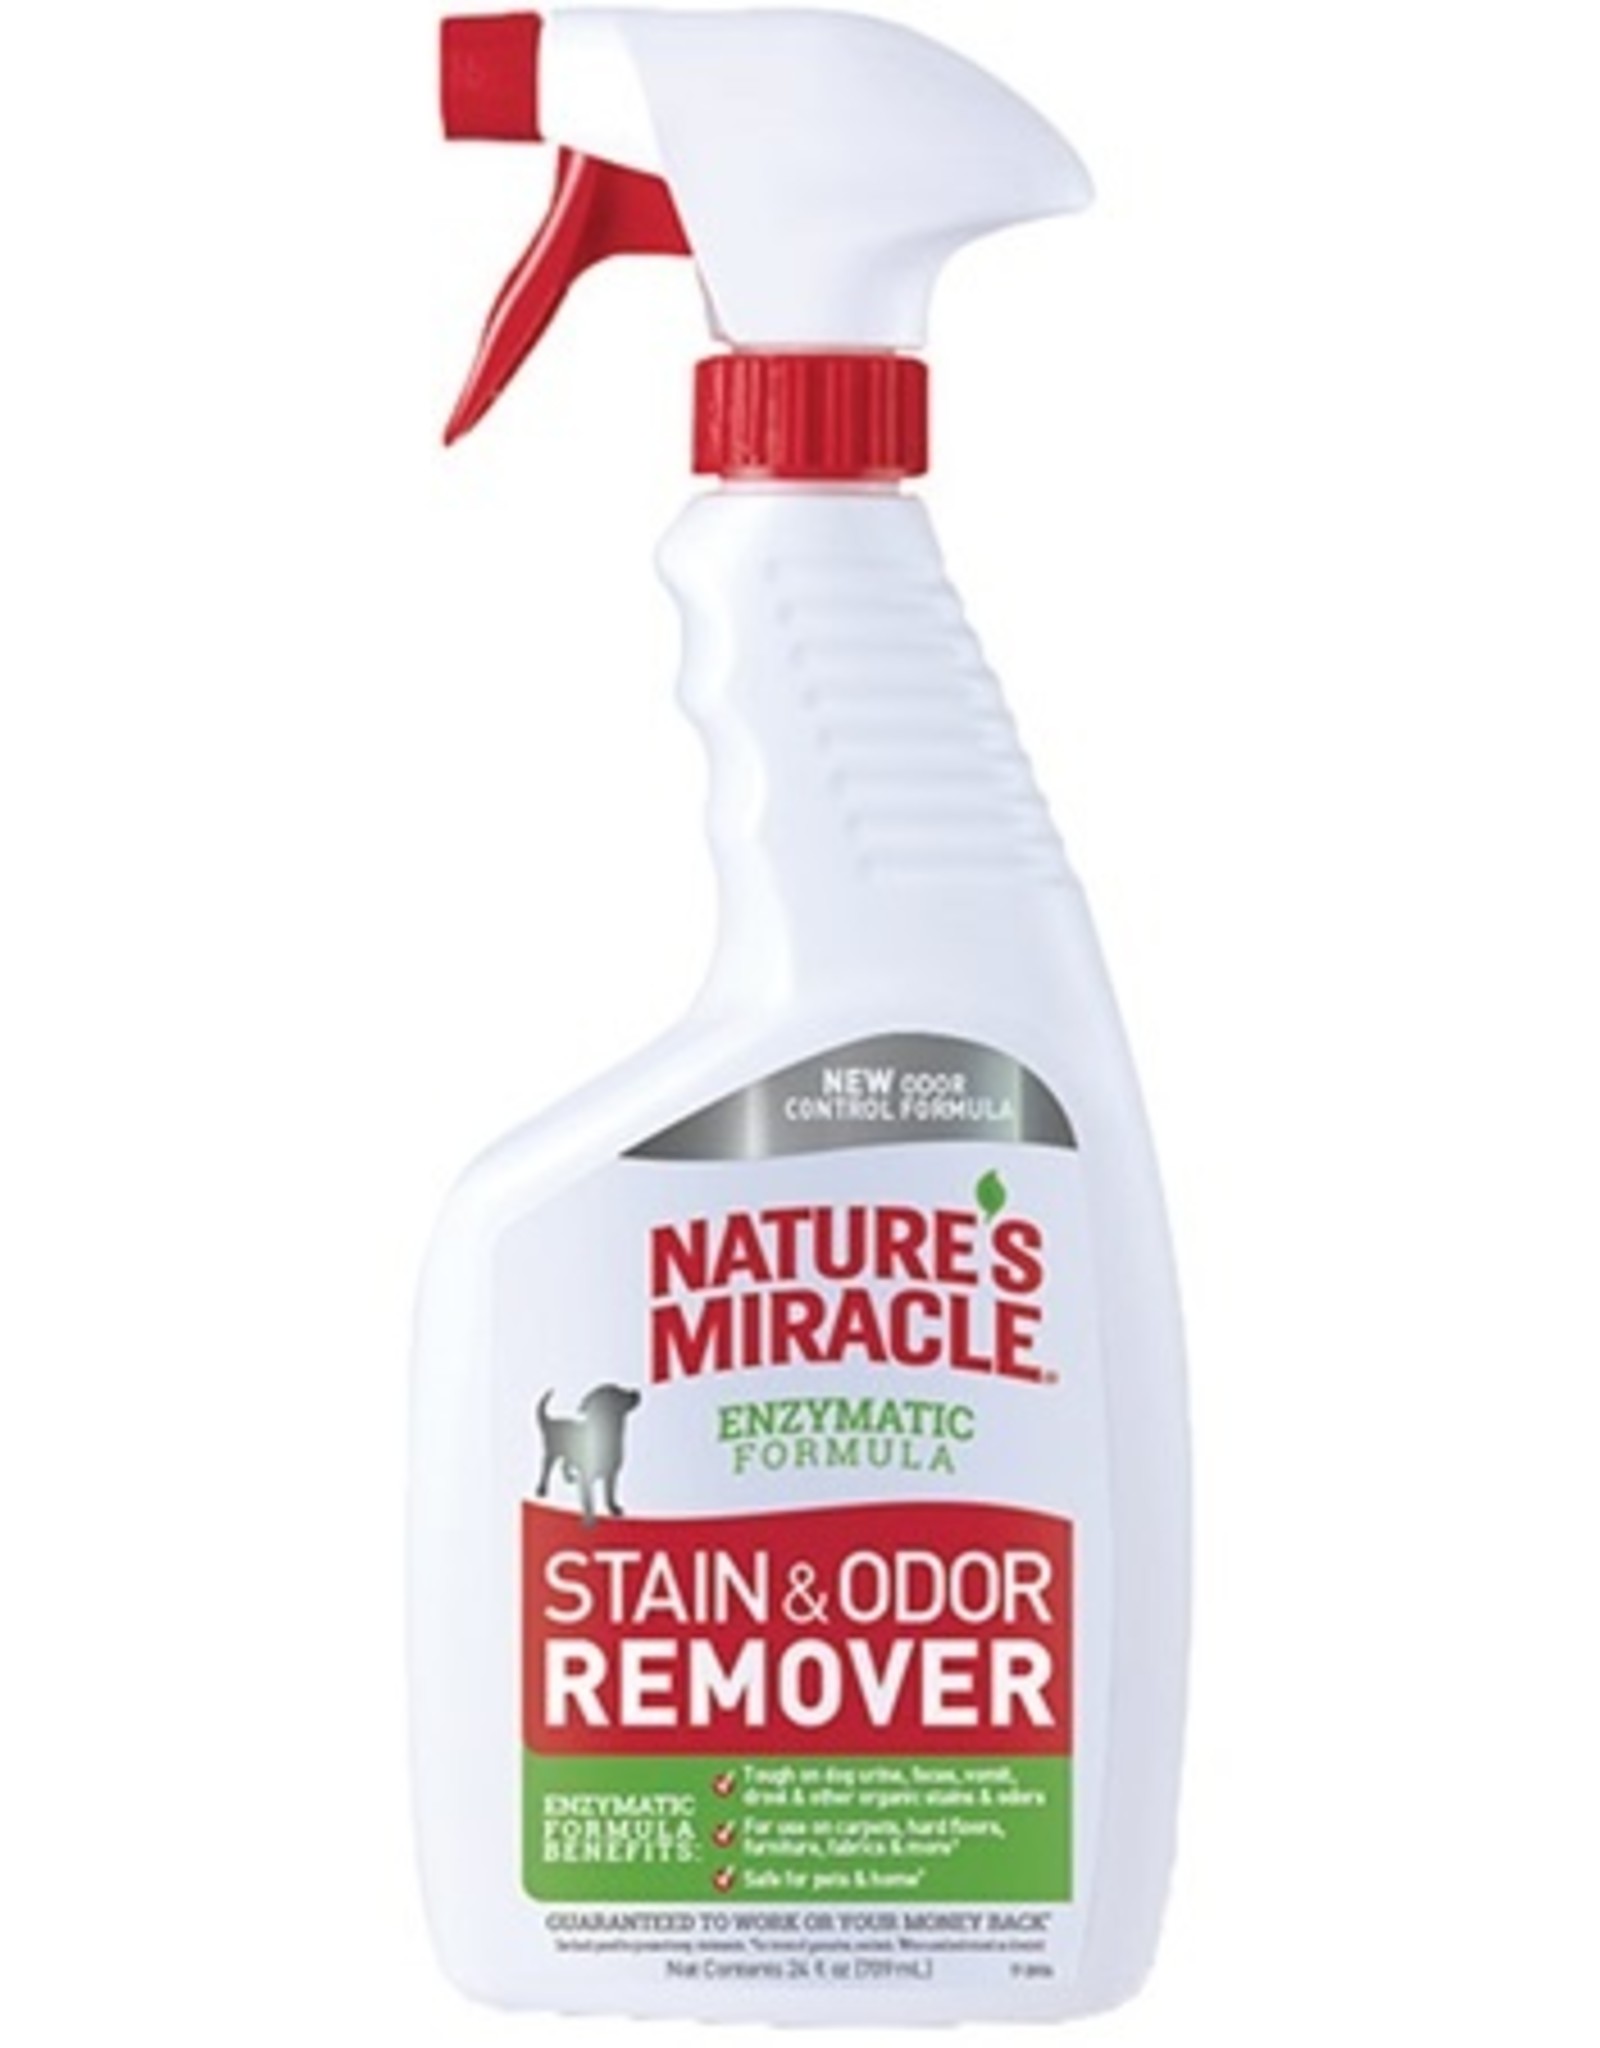 UNITED PET GROUP NATURES MIRACLE STAIN & ODOR REMOVER GALLON